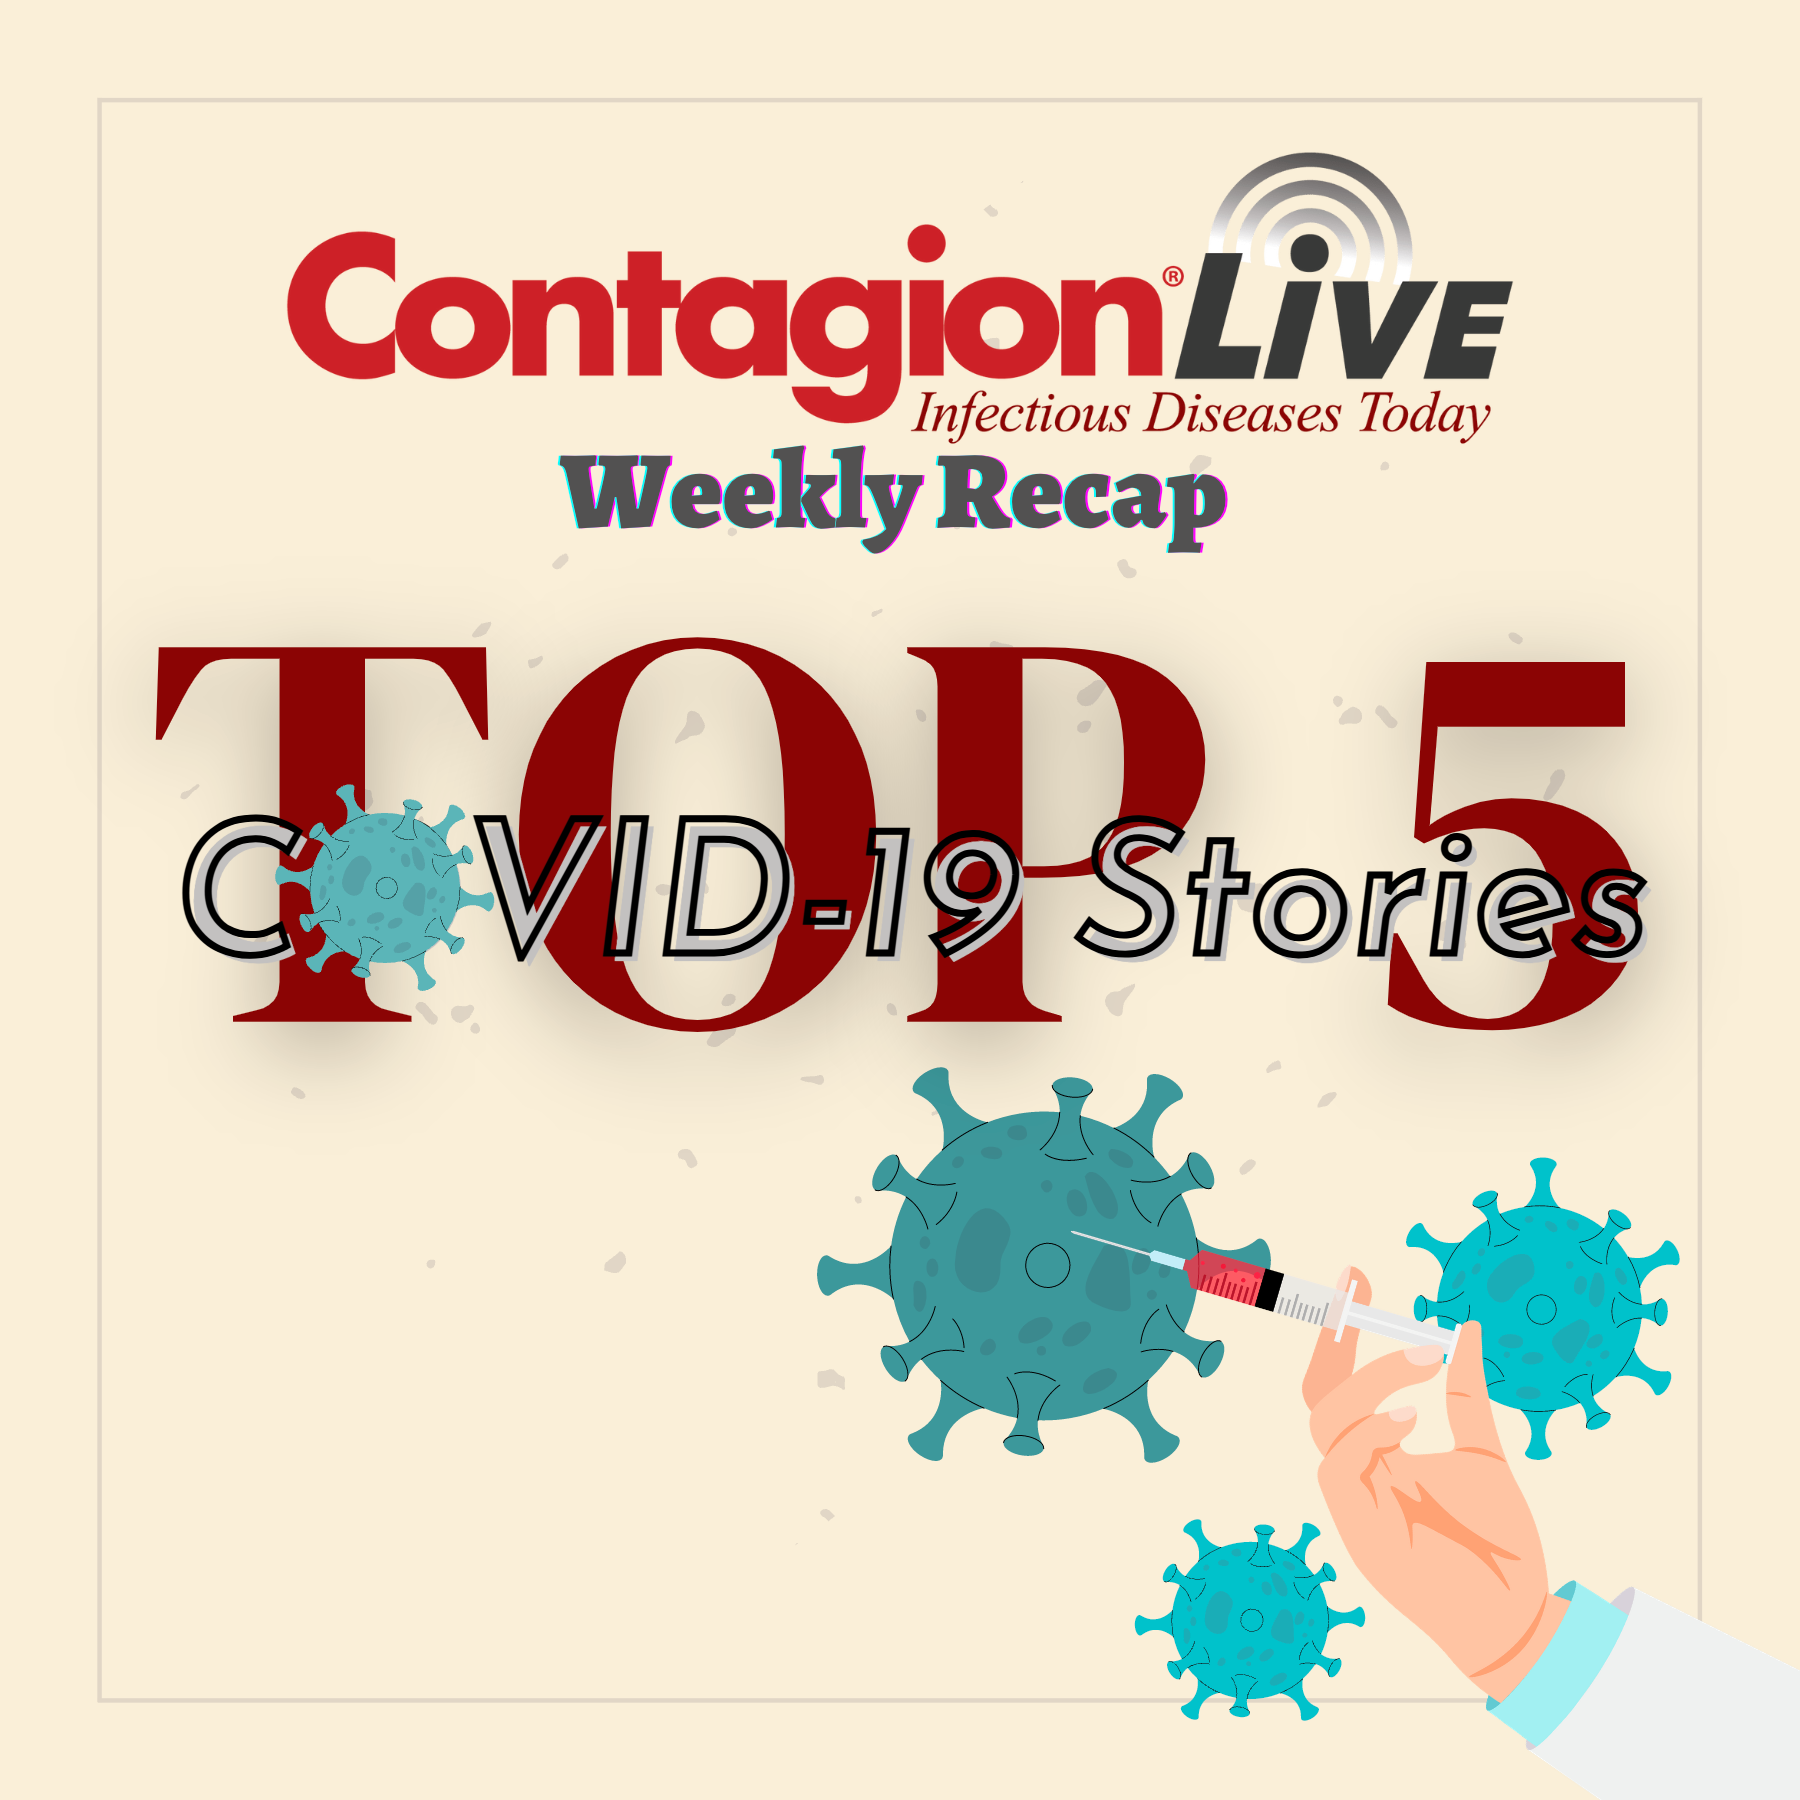 The 5 Most-Read COVID-19 Stories This Week